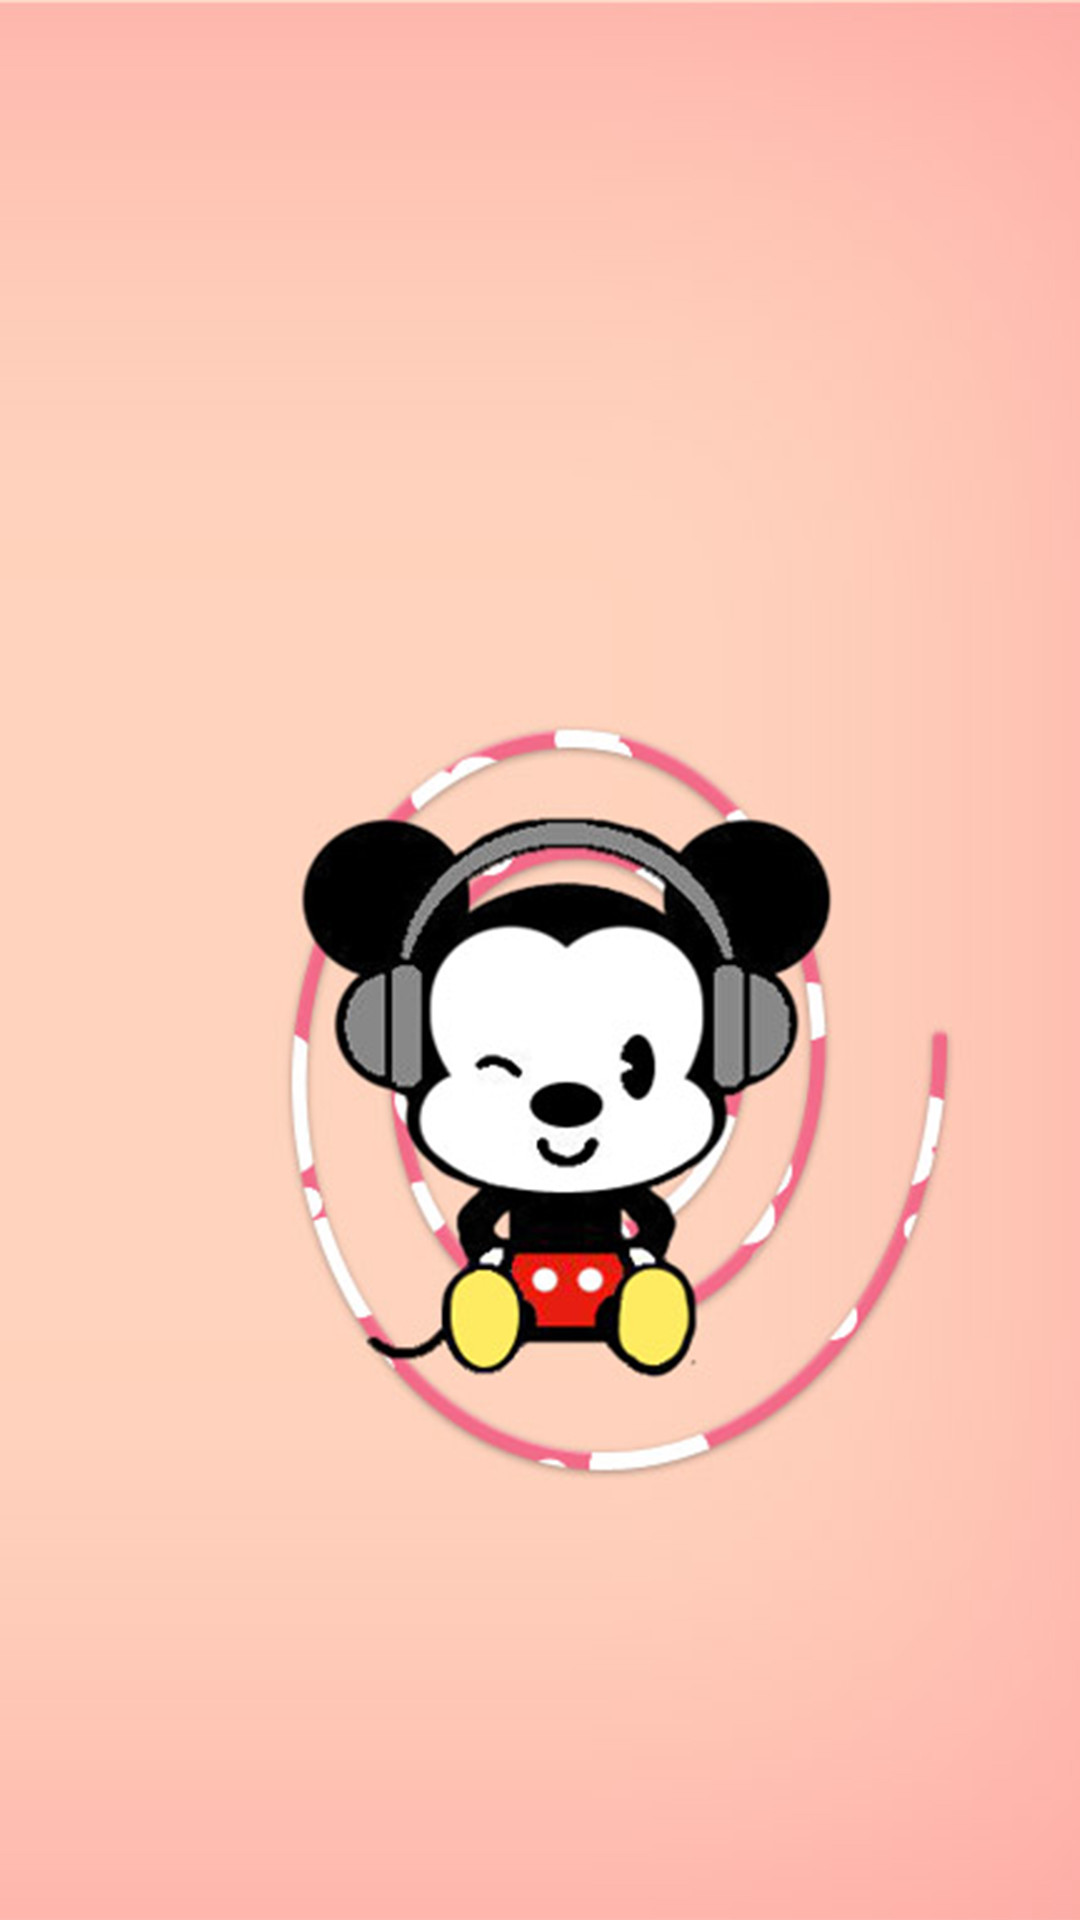 1080x1920 Mickey Wallpaper For Iphone